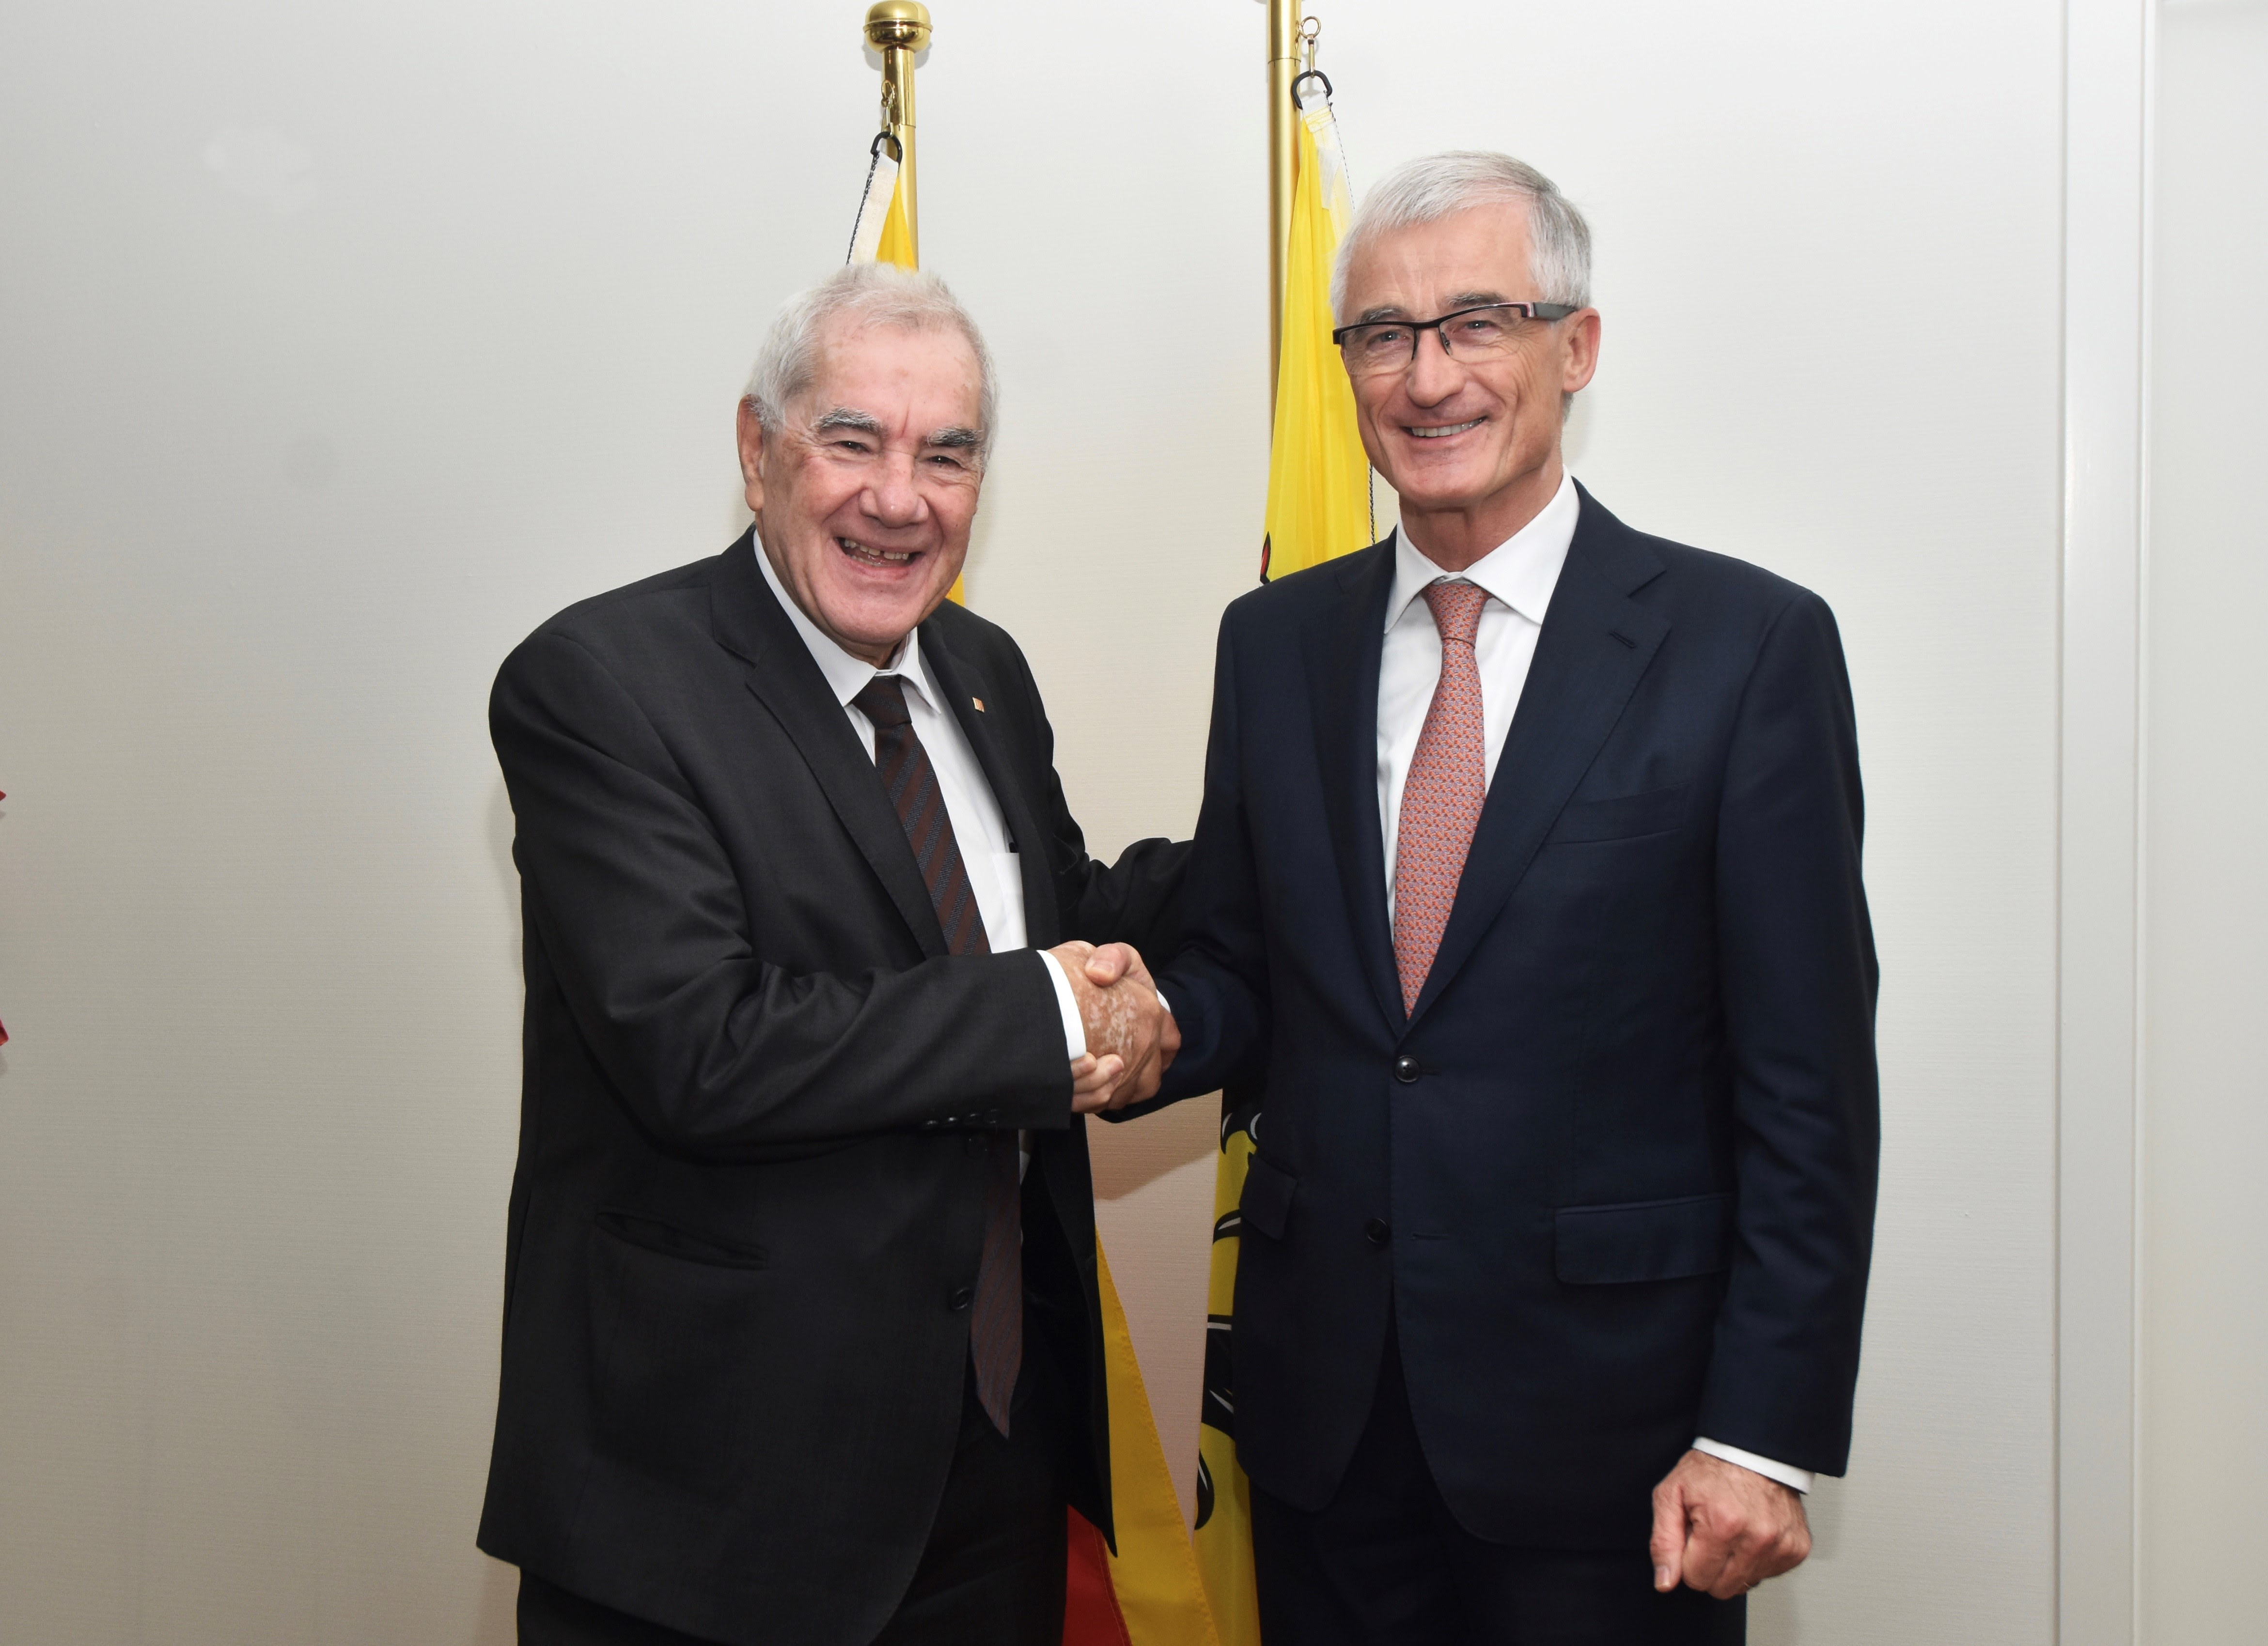 The Catalan foreign minister, Ernest Maragall, with the Flemish minister-president, Geert Bourgeois, in Brussels on October 19, 2018 (by Catalan government)